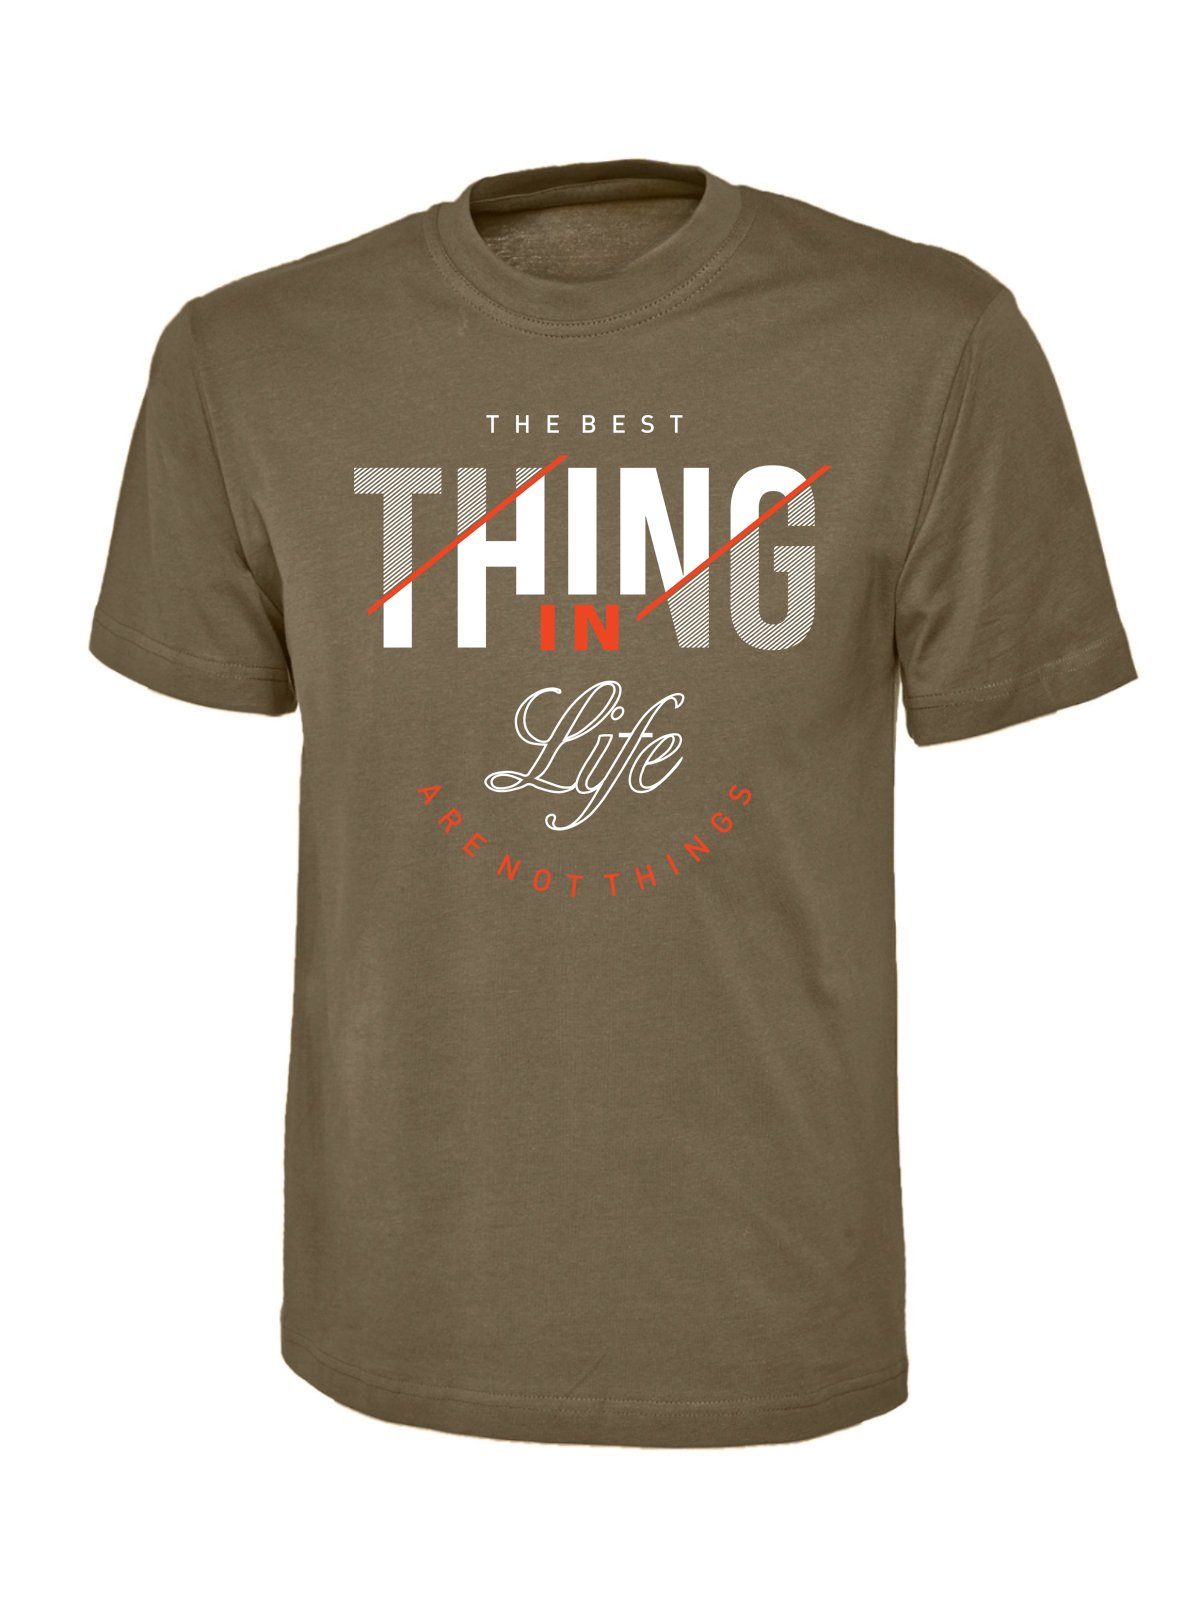 "Things In Life" Tee - Wow T-Shirts